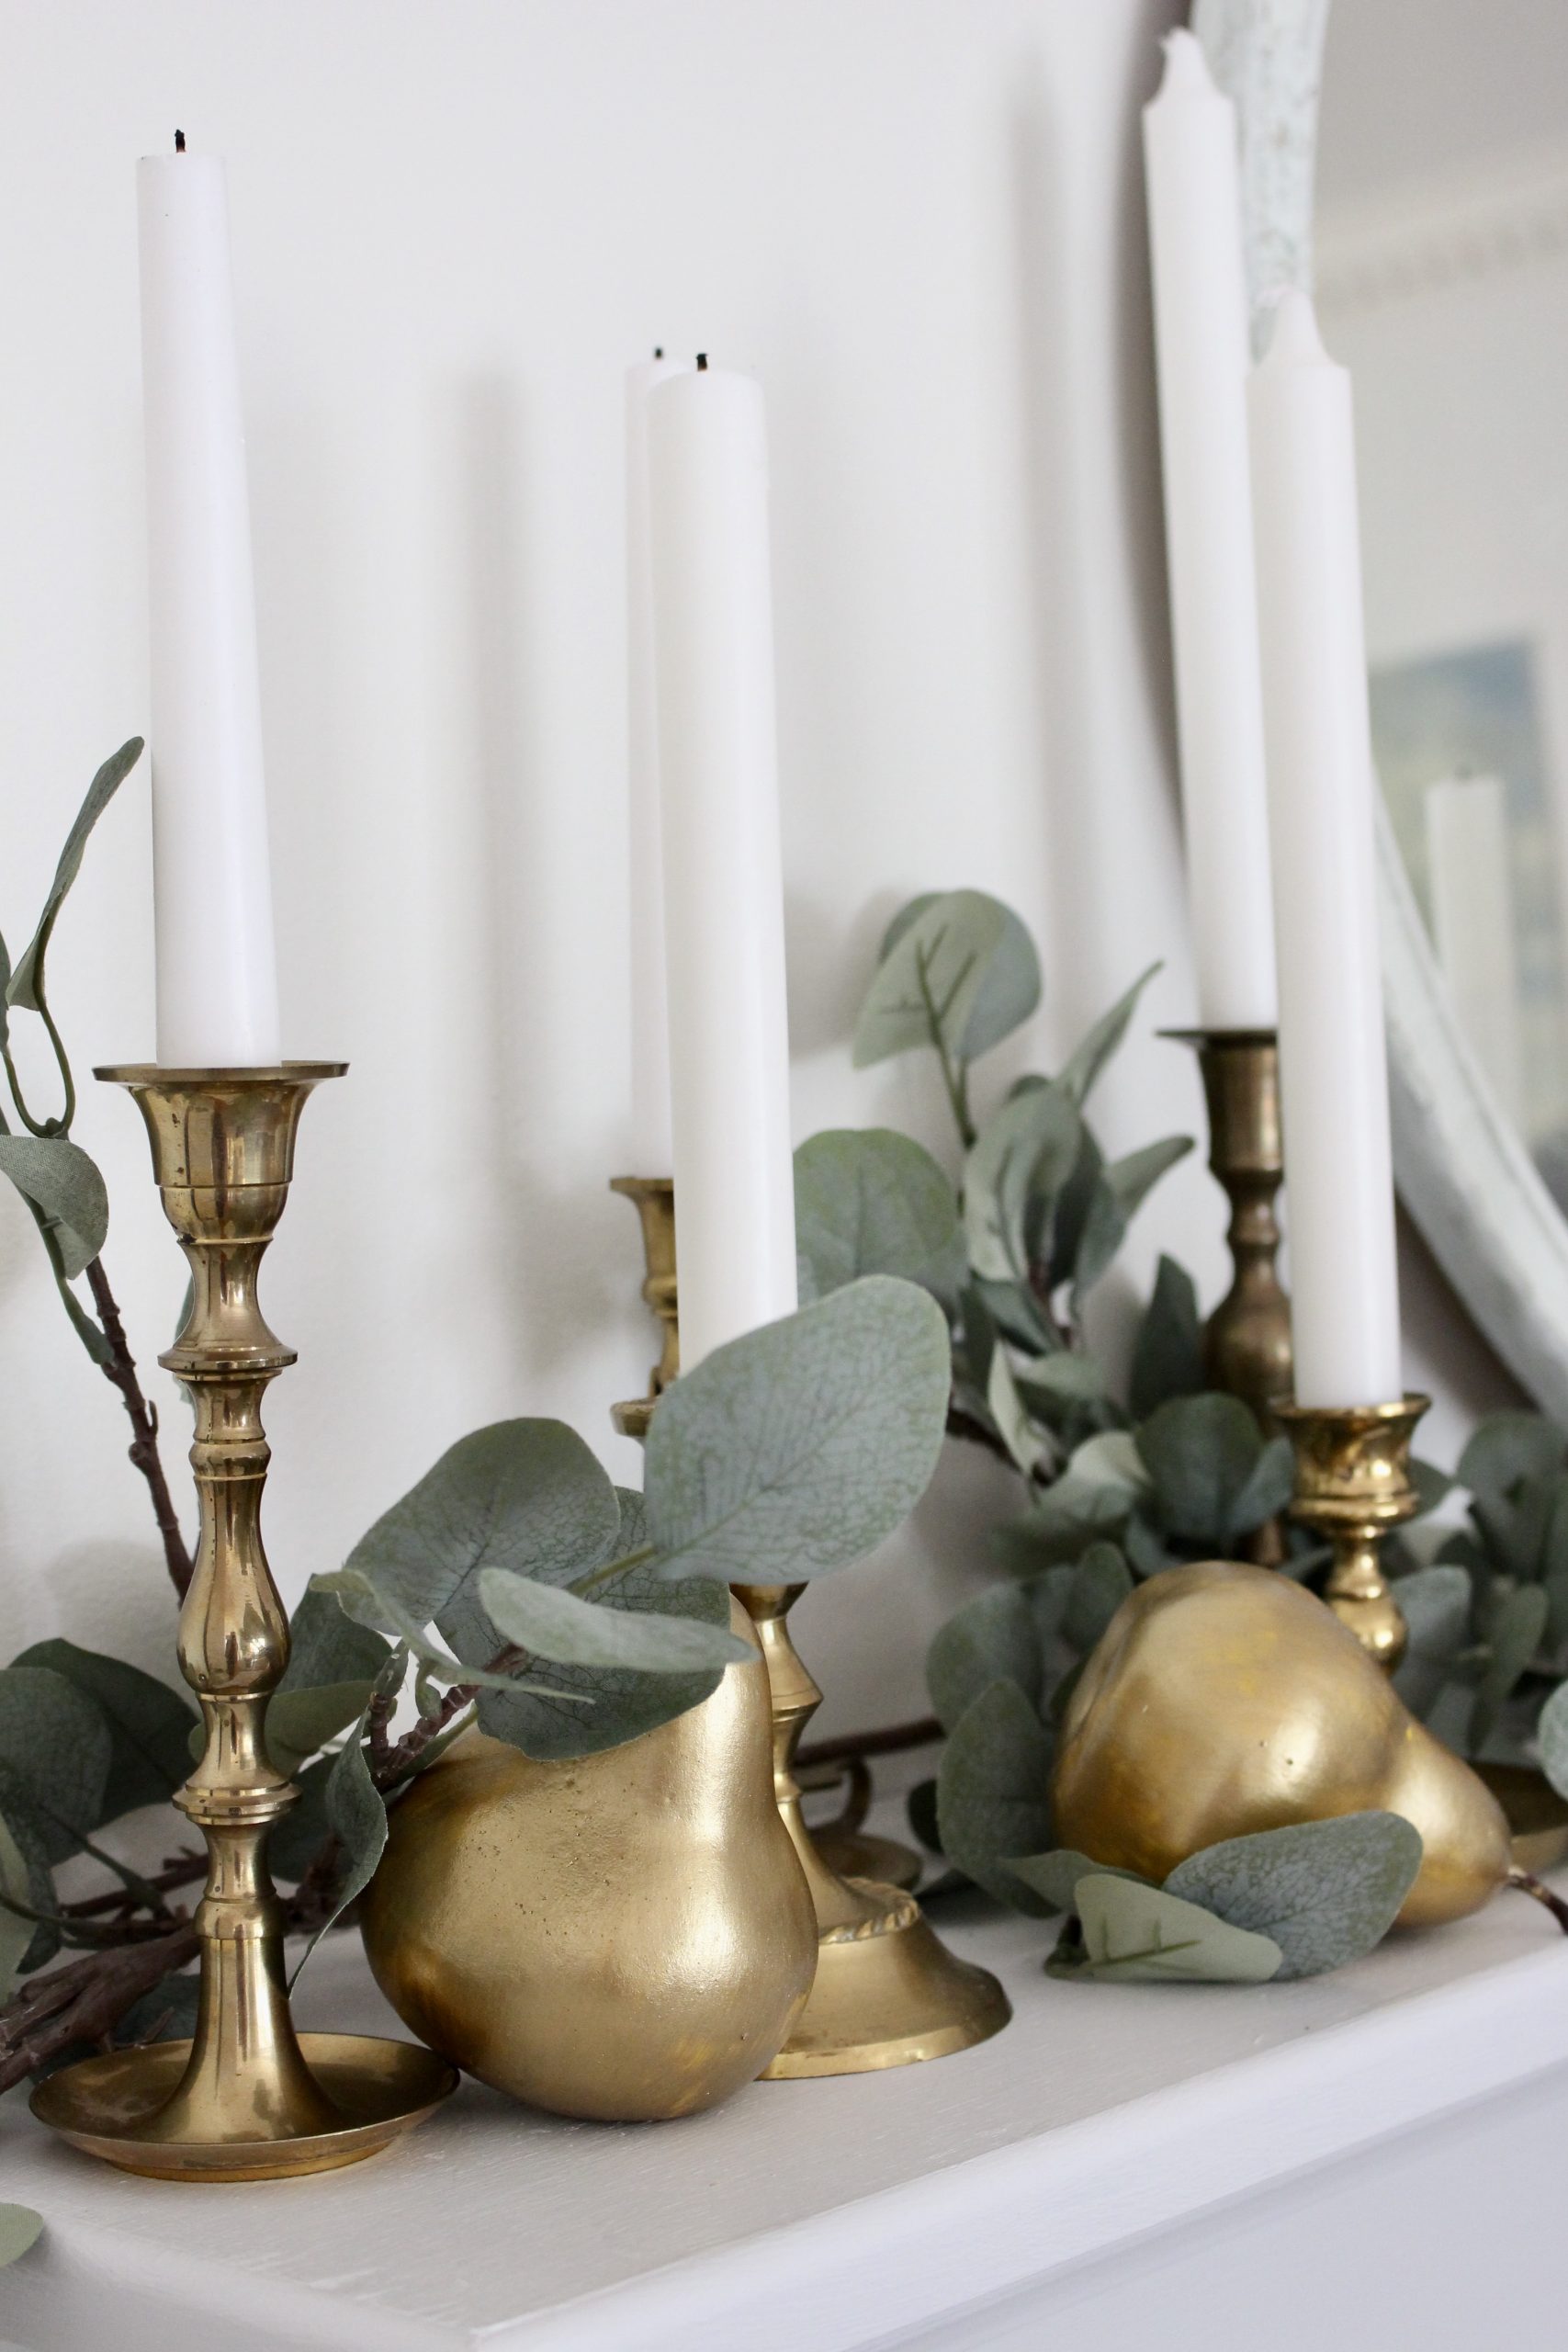 Dressing a Fall Mantel with Vintage Candlesticks and DIY Pears